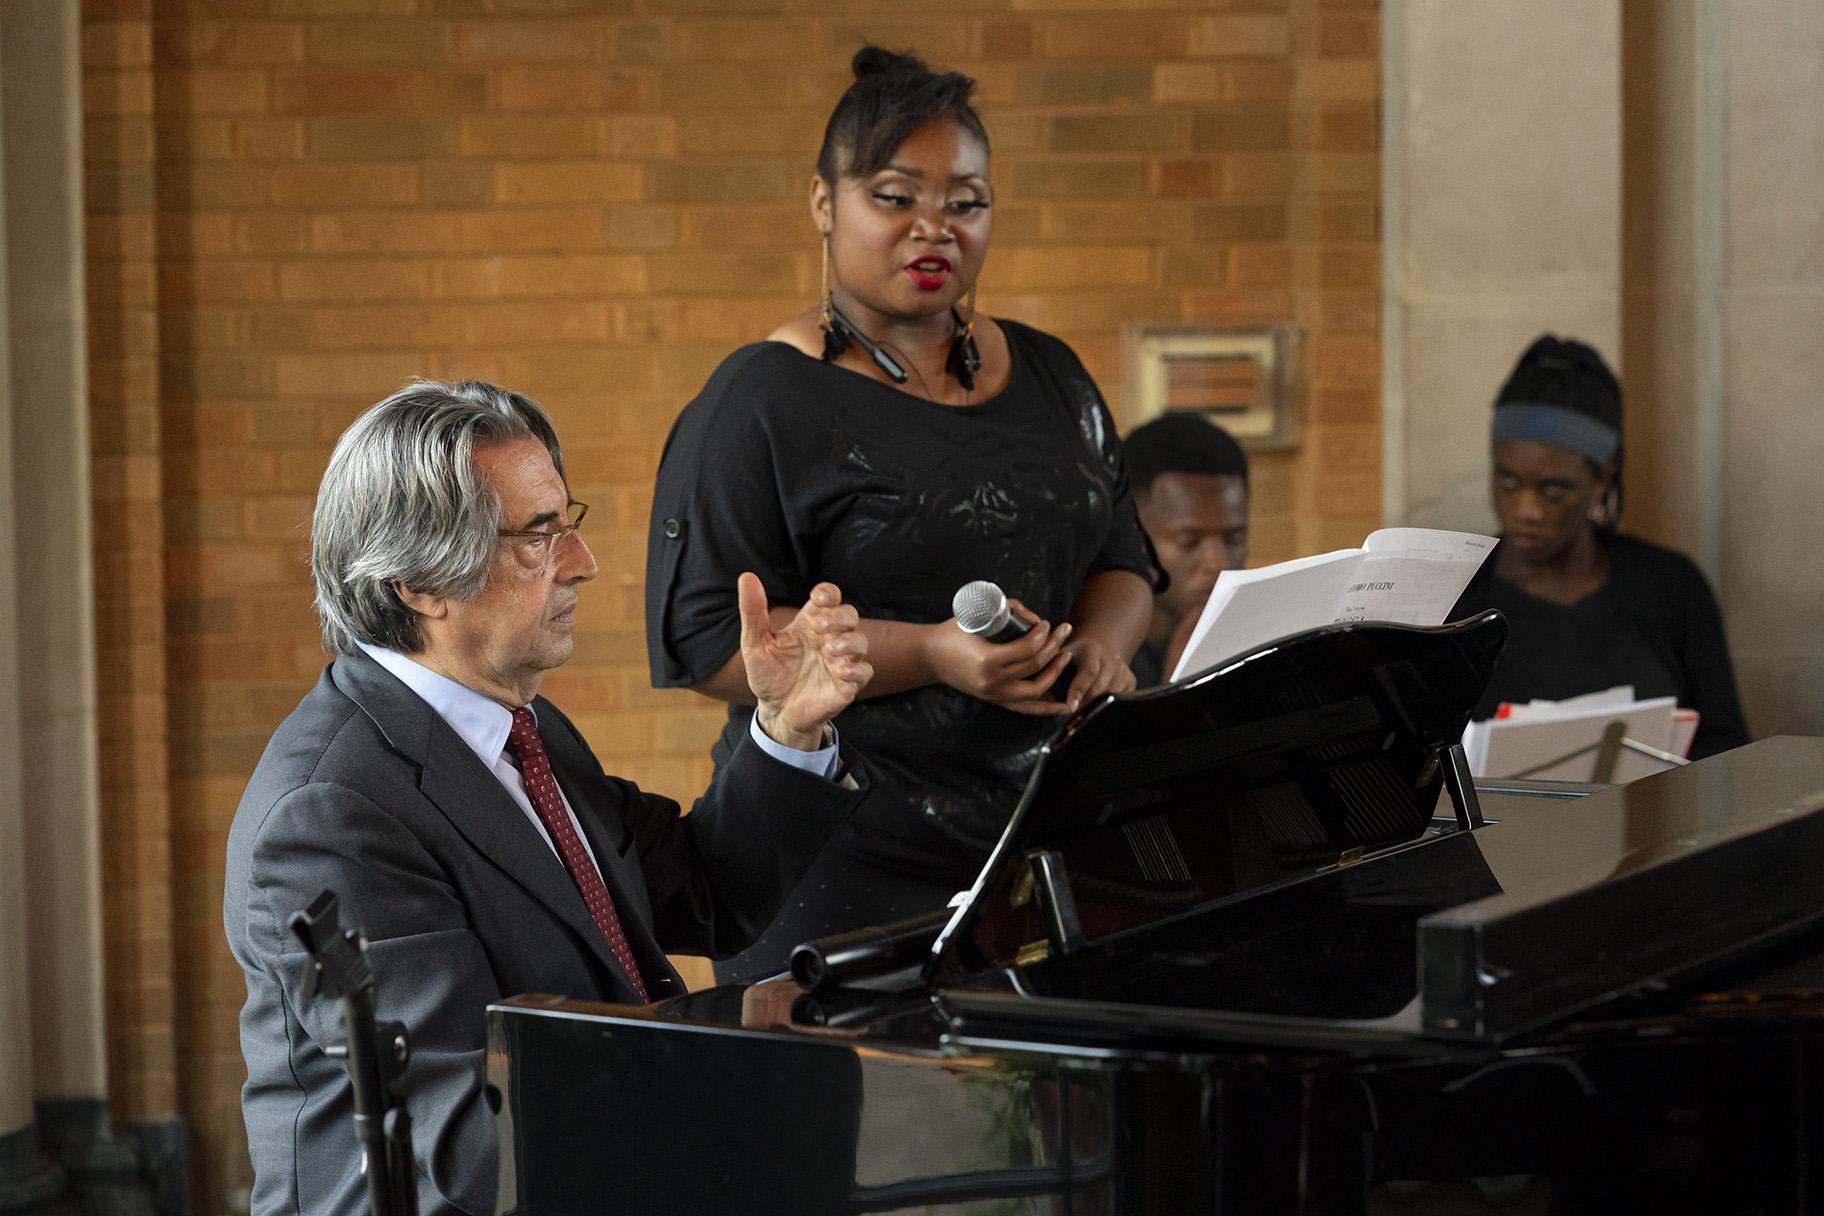 Chicago Symphony Orchestra Zell Music Director Riccardo Muti works with soprano Jessalle Jakes. (Photo by Todd Rosenberg)